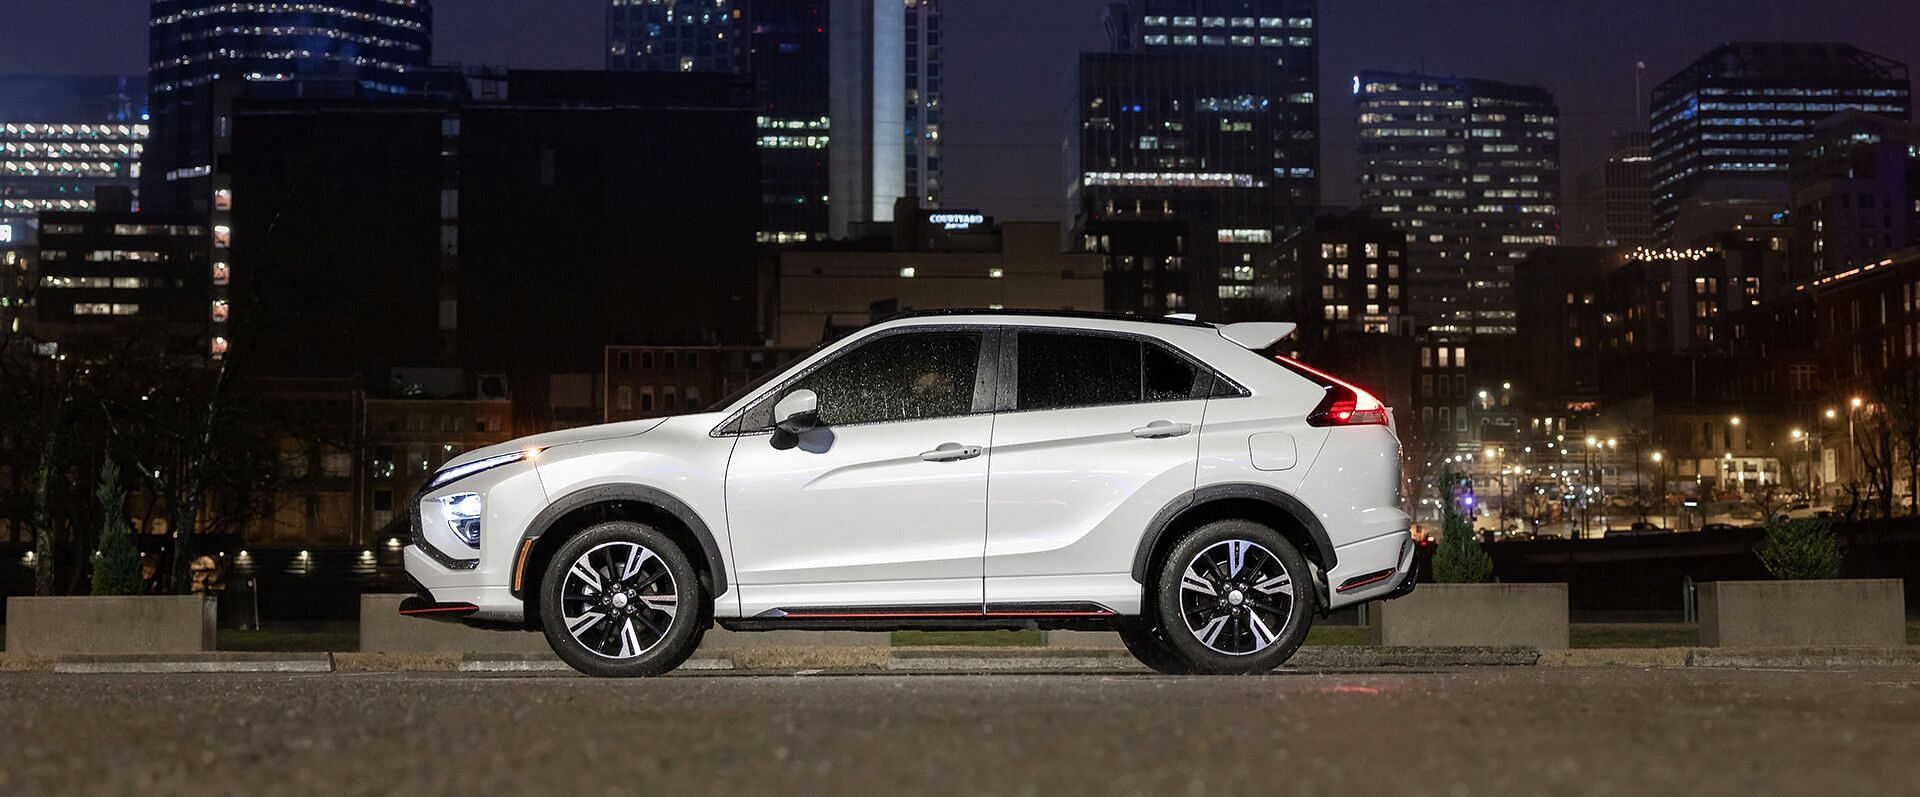 A white 2023 Mitsubishi Eclipsce Cross standing in a parking. In the background, the city at night.